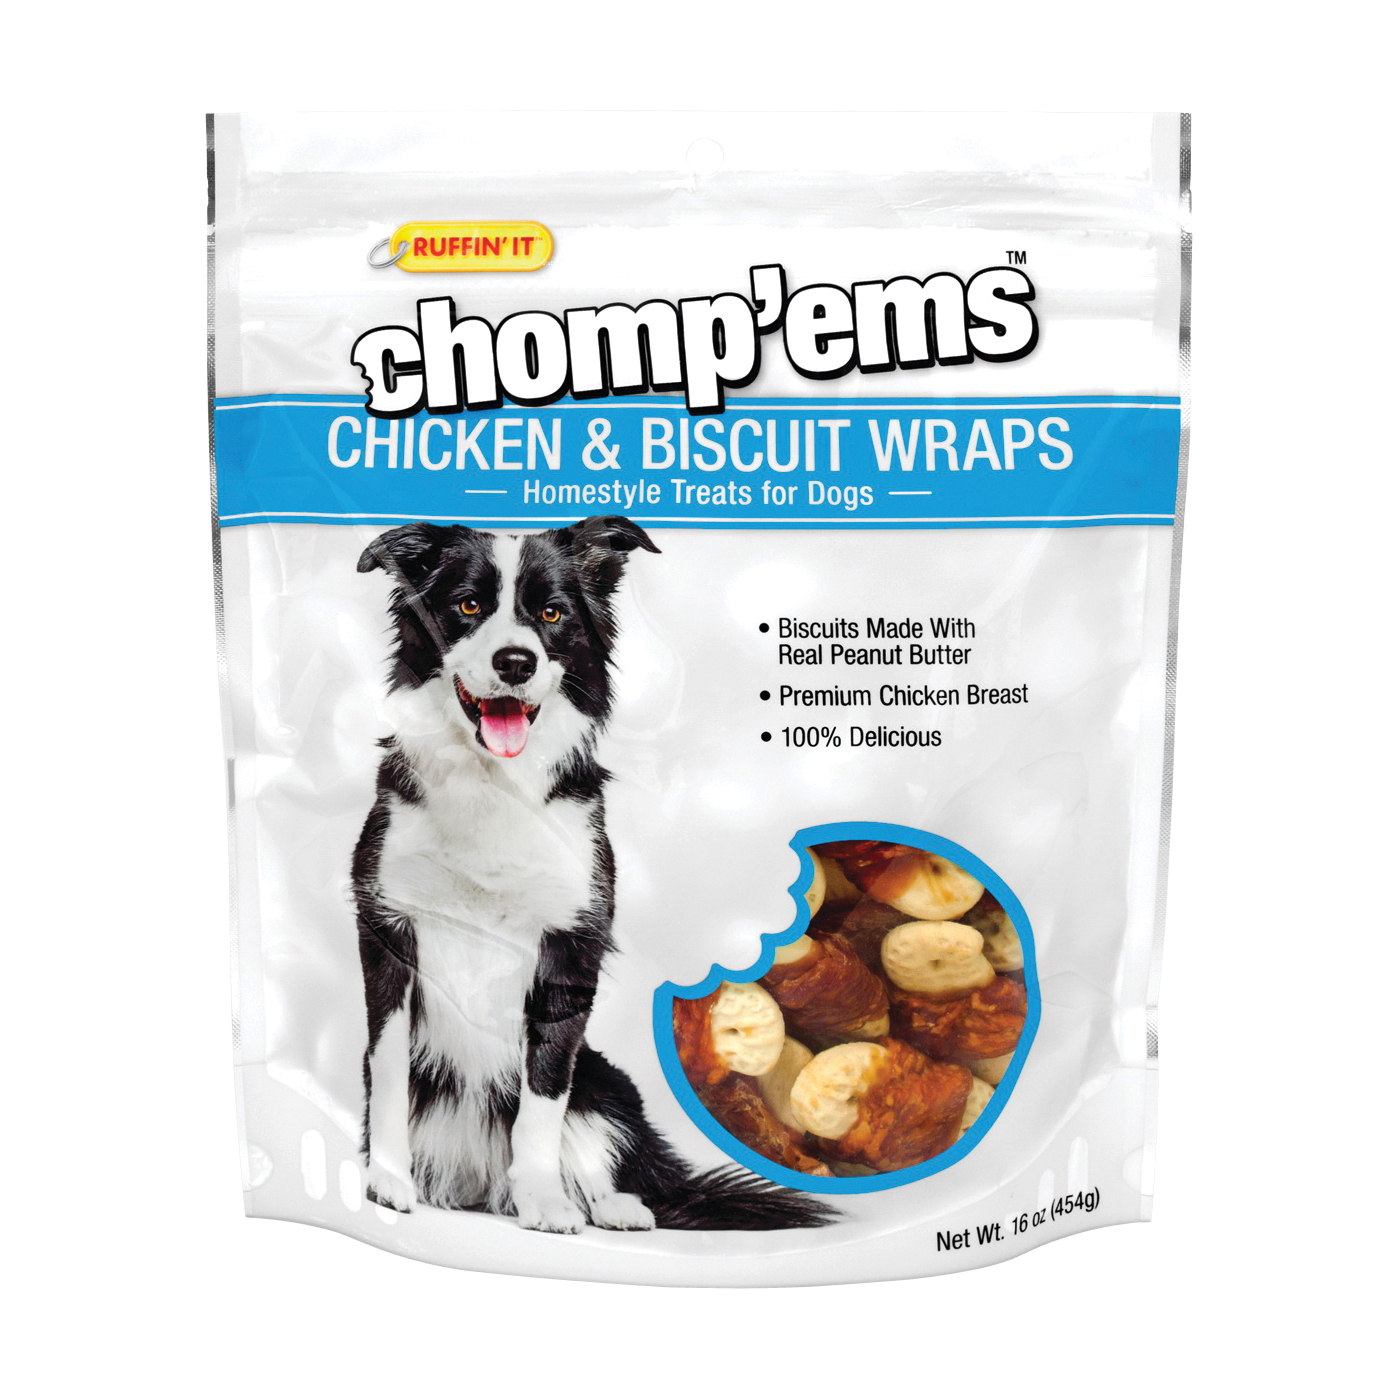 Chomp'ems 8188 Chicken and Biscuit Wrap, Peanut Butter Flavor, 16 oz